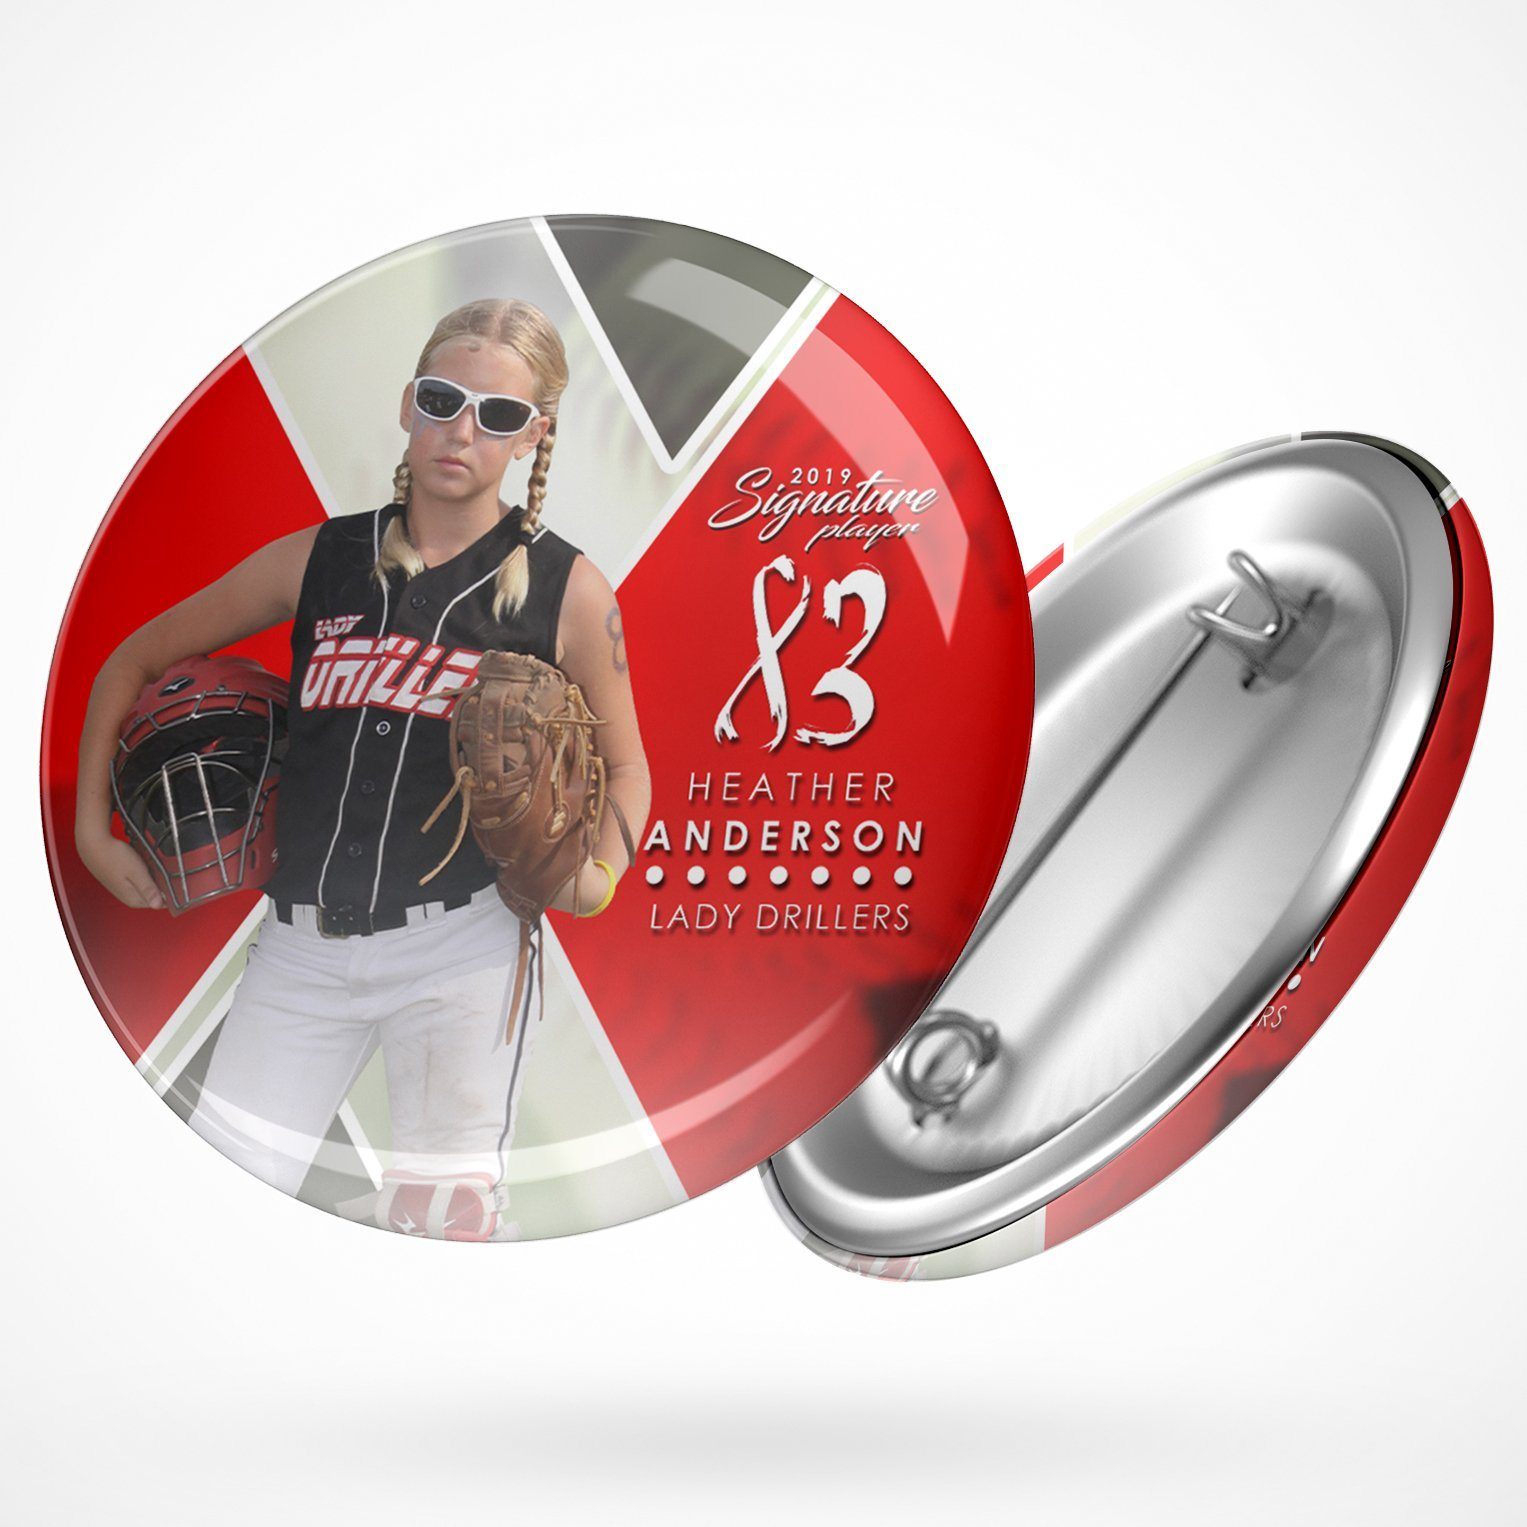 Signature Player - Softball - V2 - Extraction Button Template-Photoshop Template - Photo Solutions